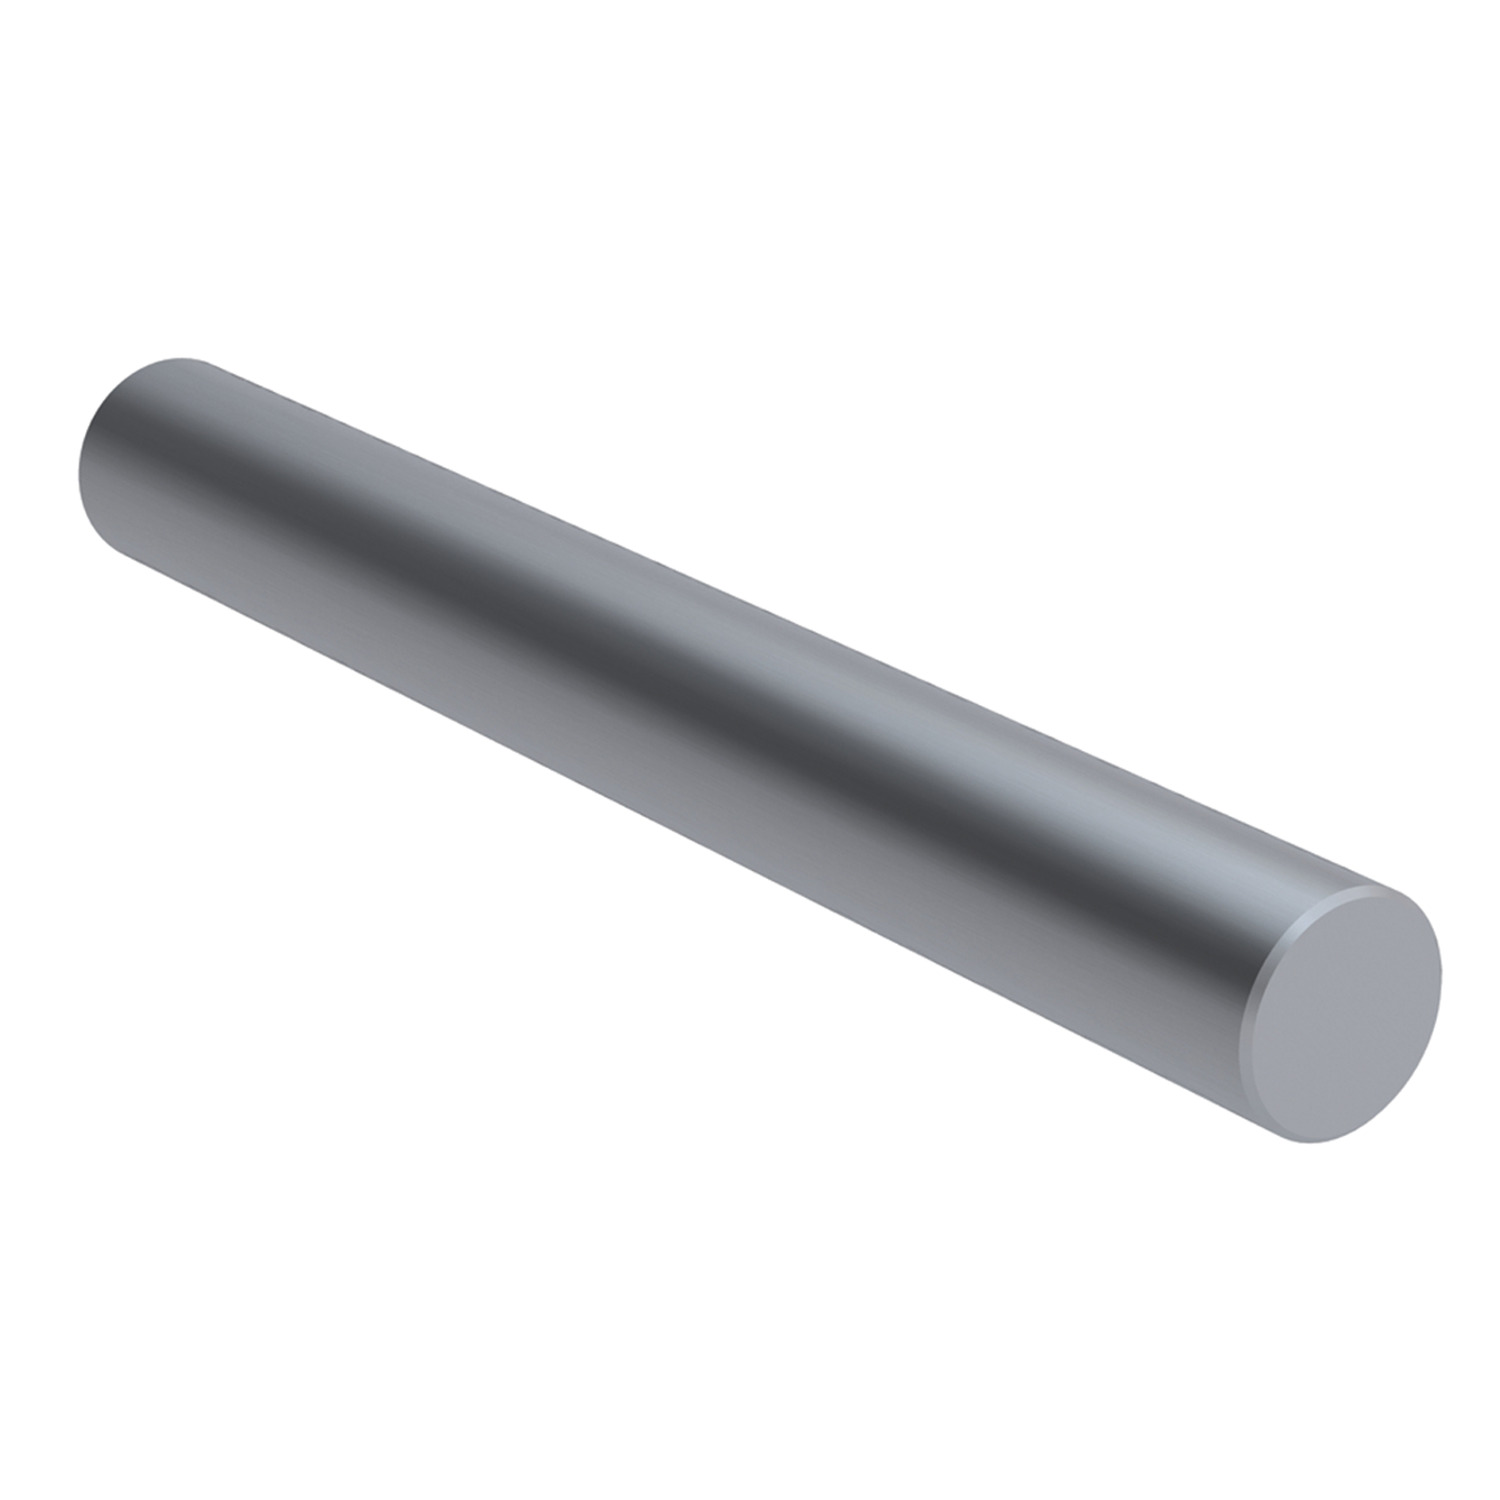 Product L1772.08, Ø8 Hardened Stainless Shafts for linear bearings / 